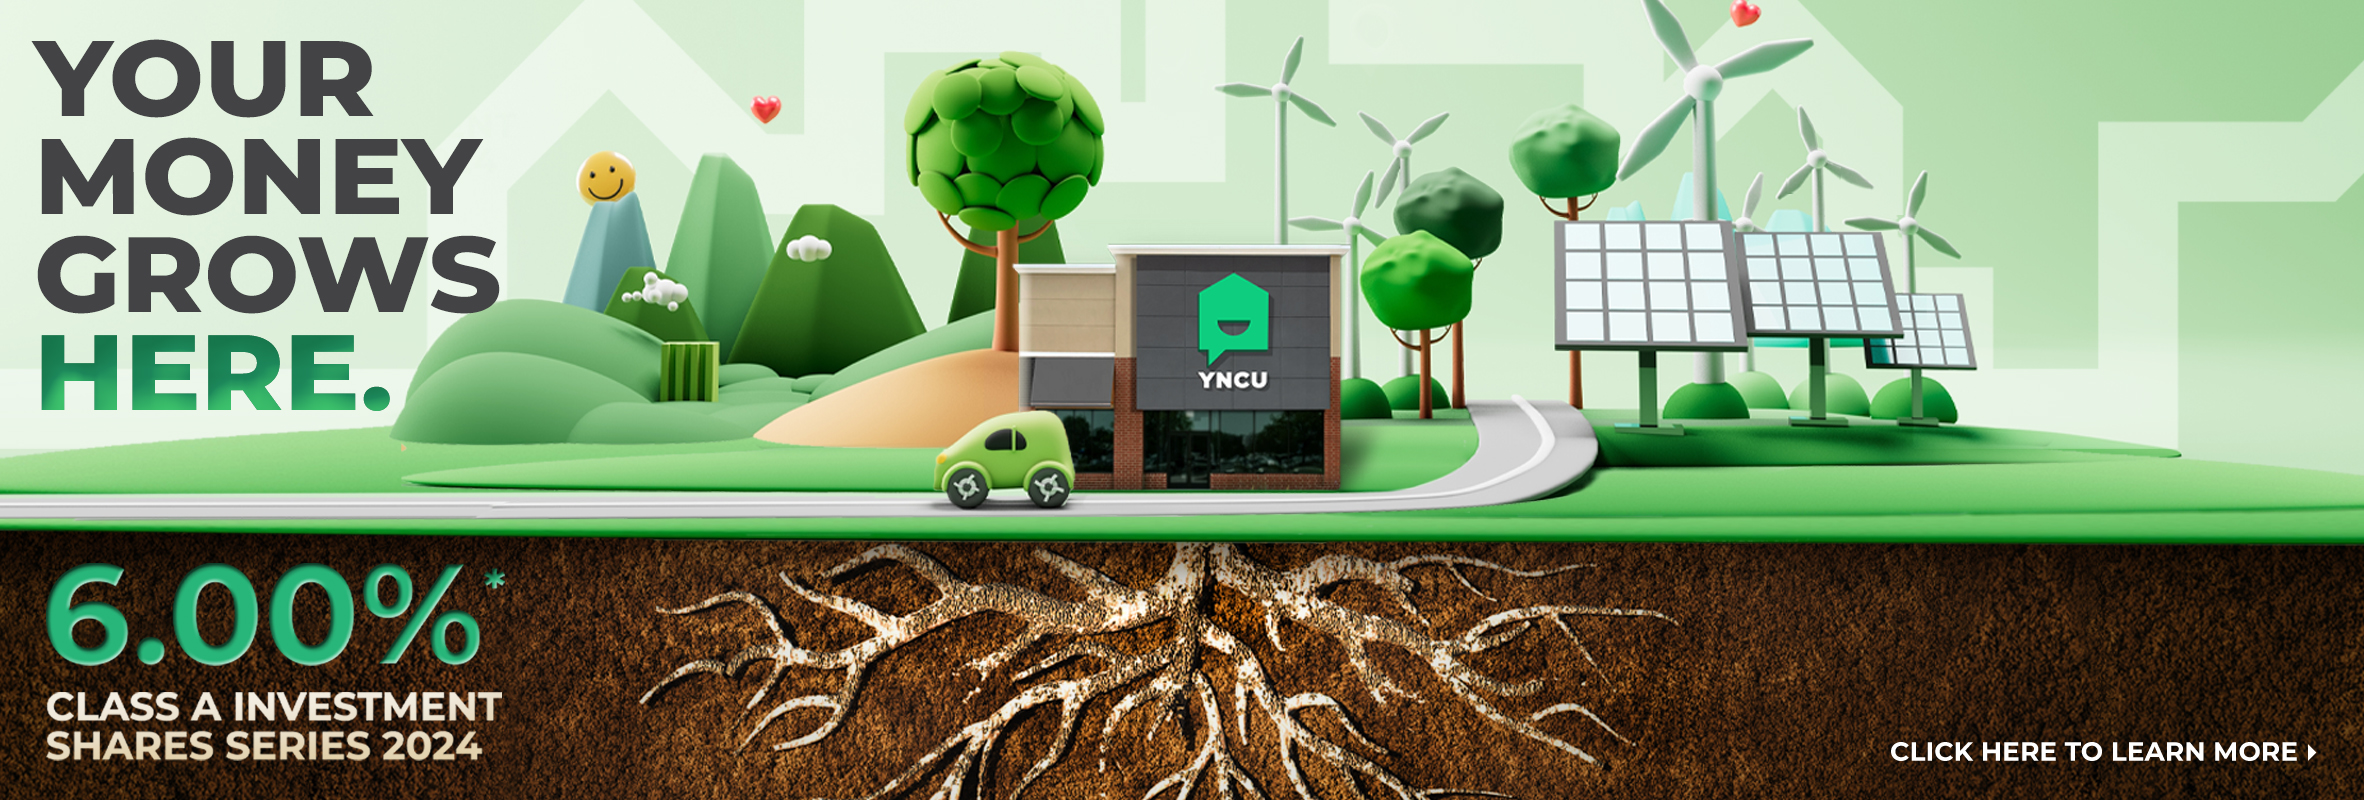 A YNCU branch with various renewable energy sources in the background. Roots are growing from the branch.